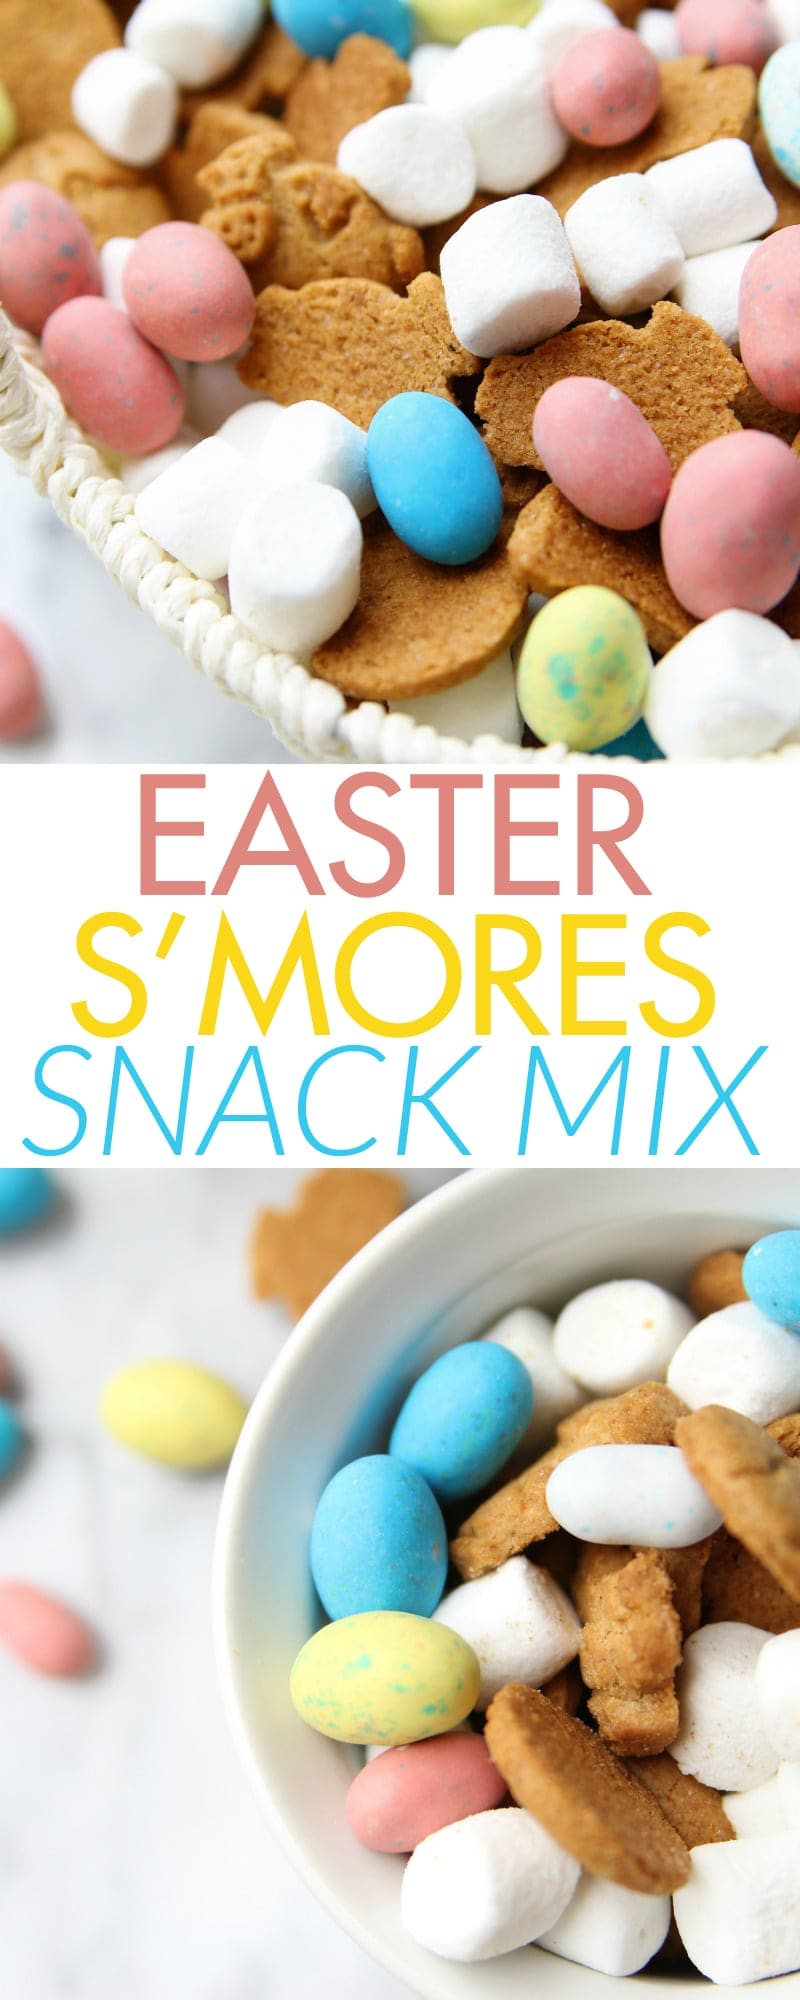 Easter Smores Snack Mix - Easy, festive, and delicious snack! Combine grahams, marshmallows, and chocolate eggs. Yum!